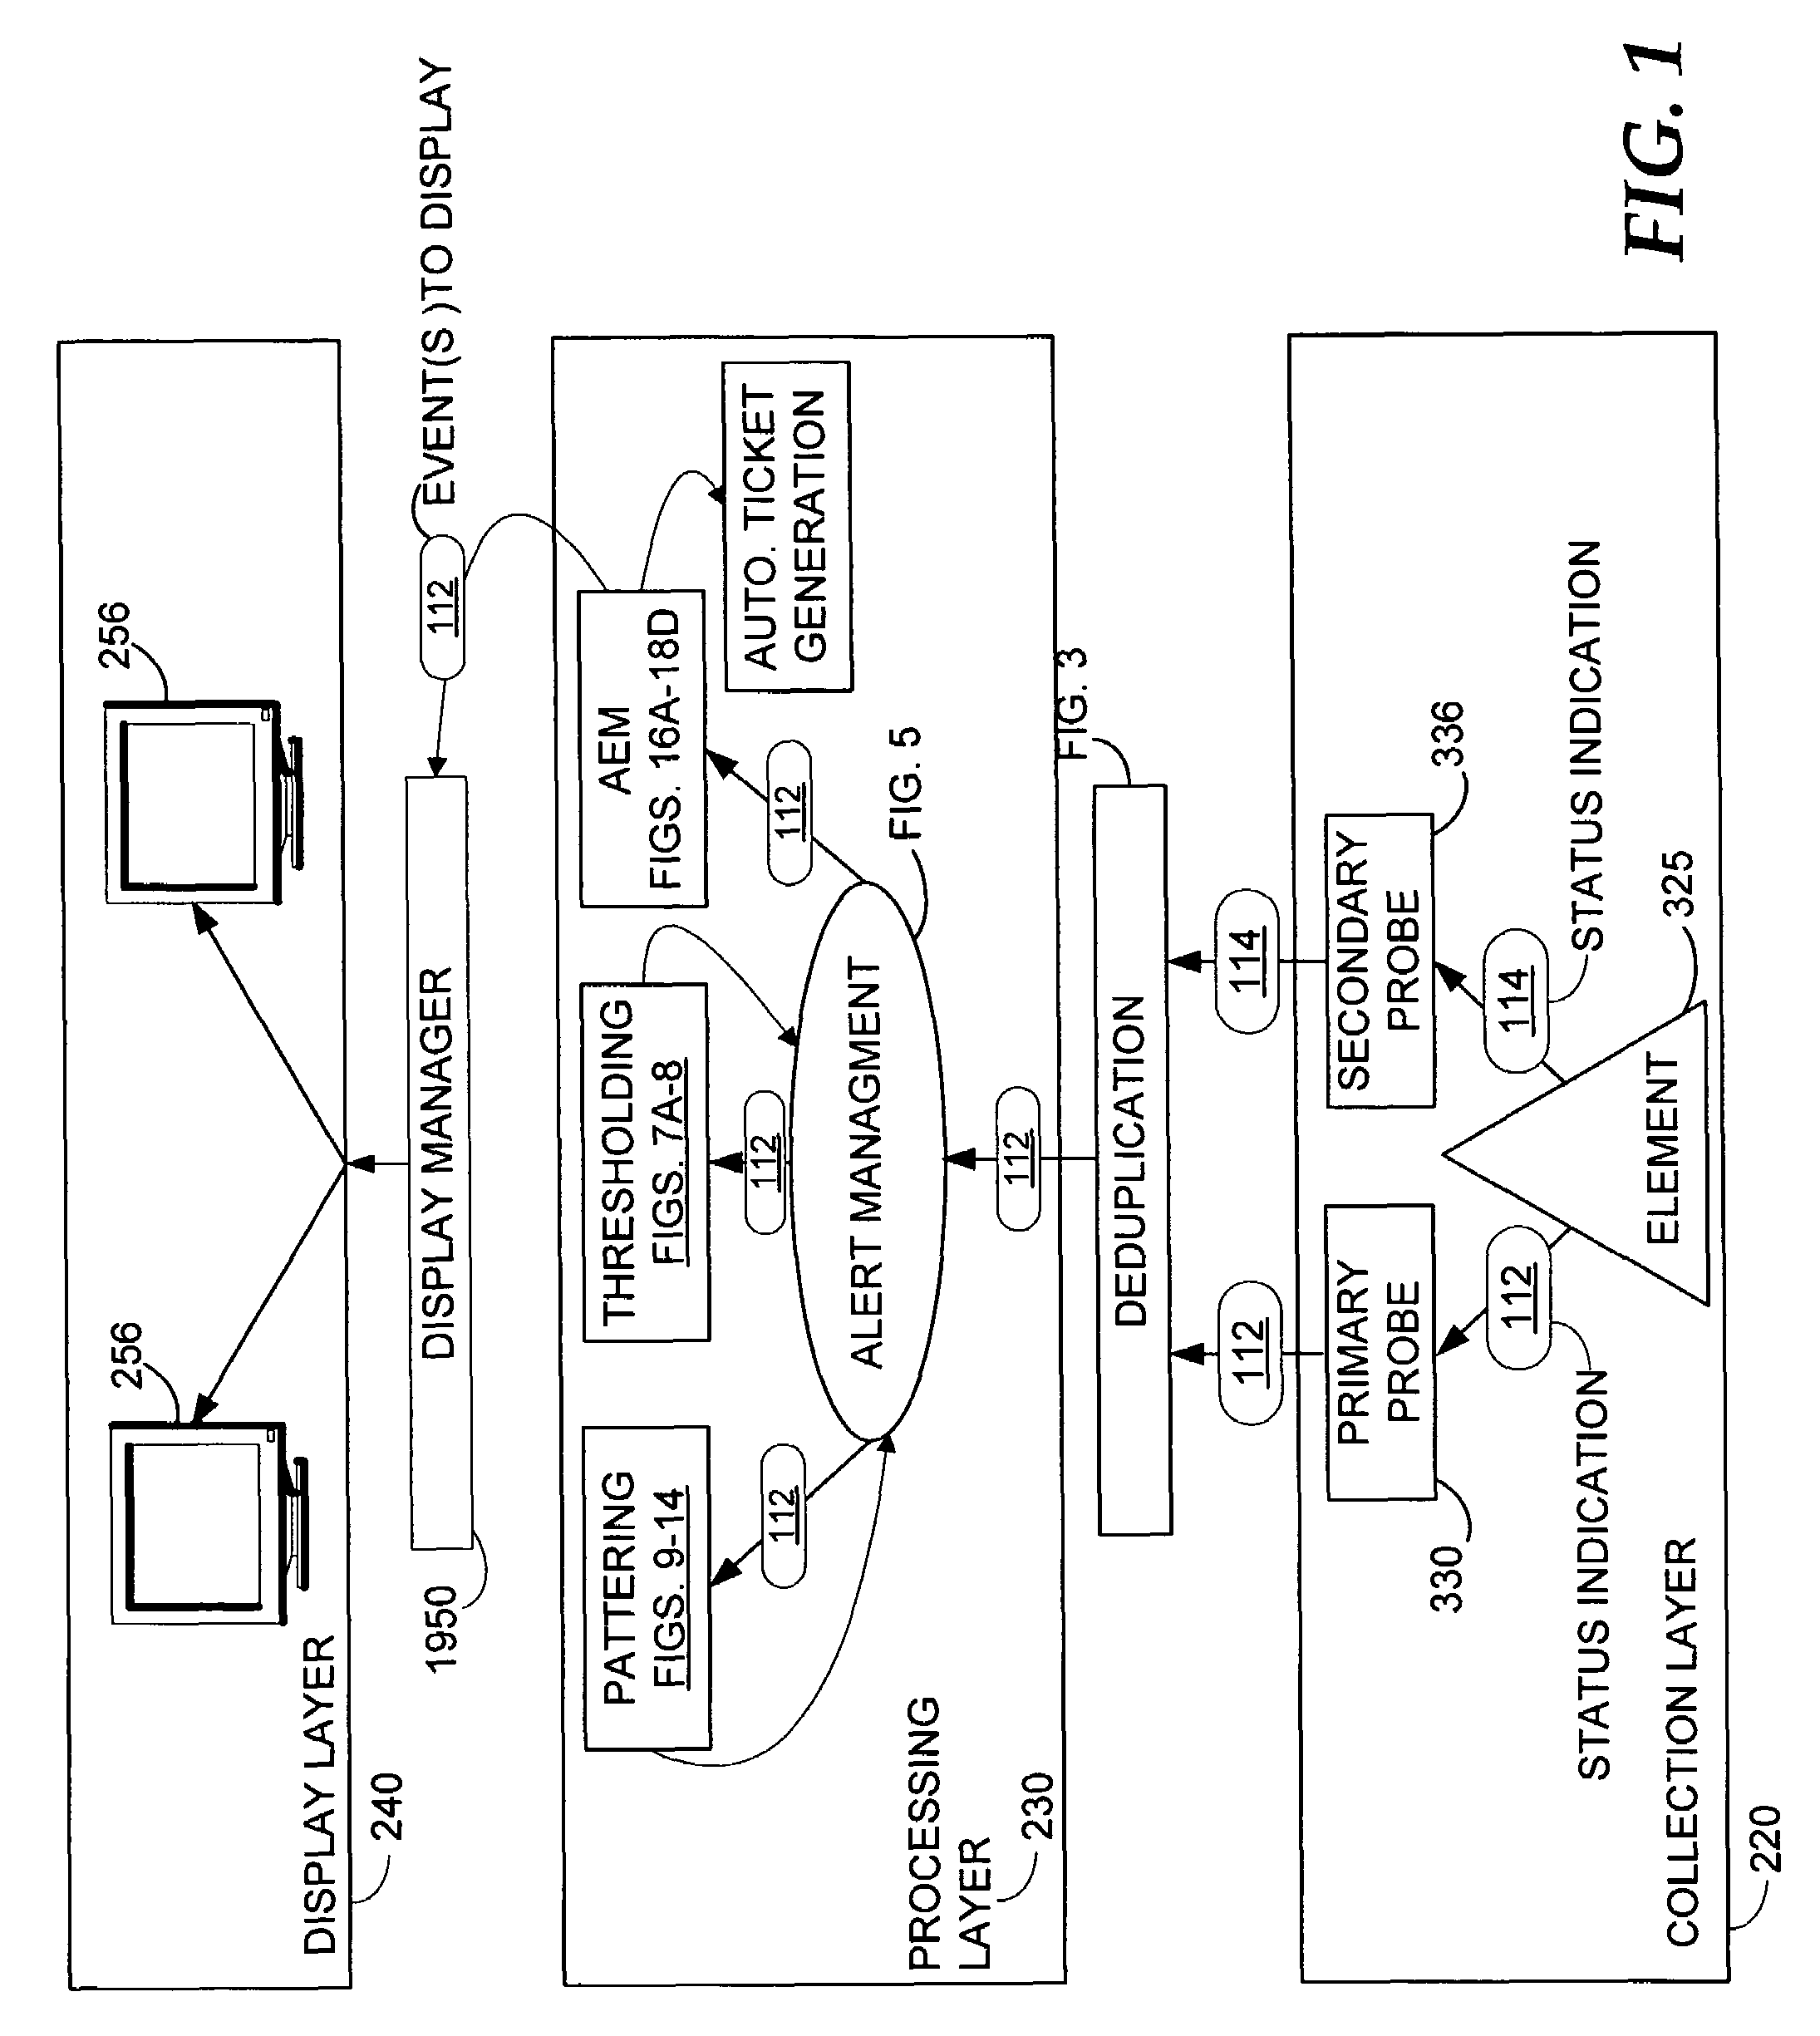 Method and system for deduplicating status indications in a communications network